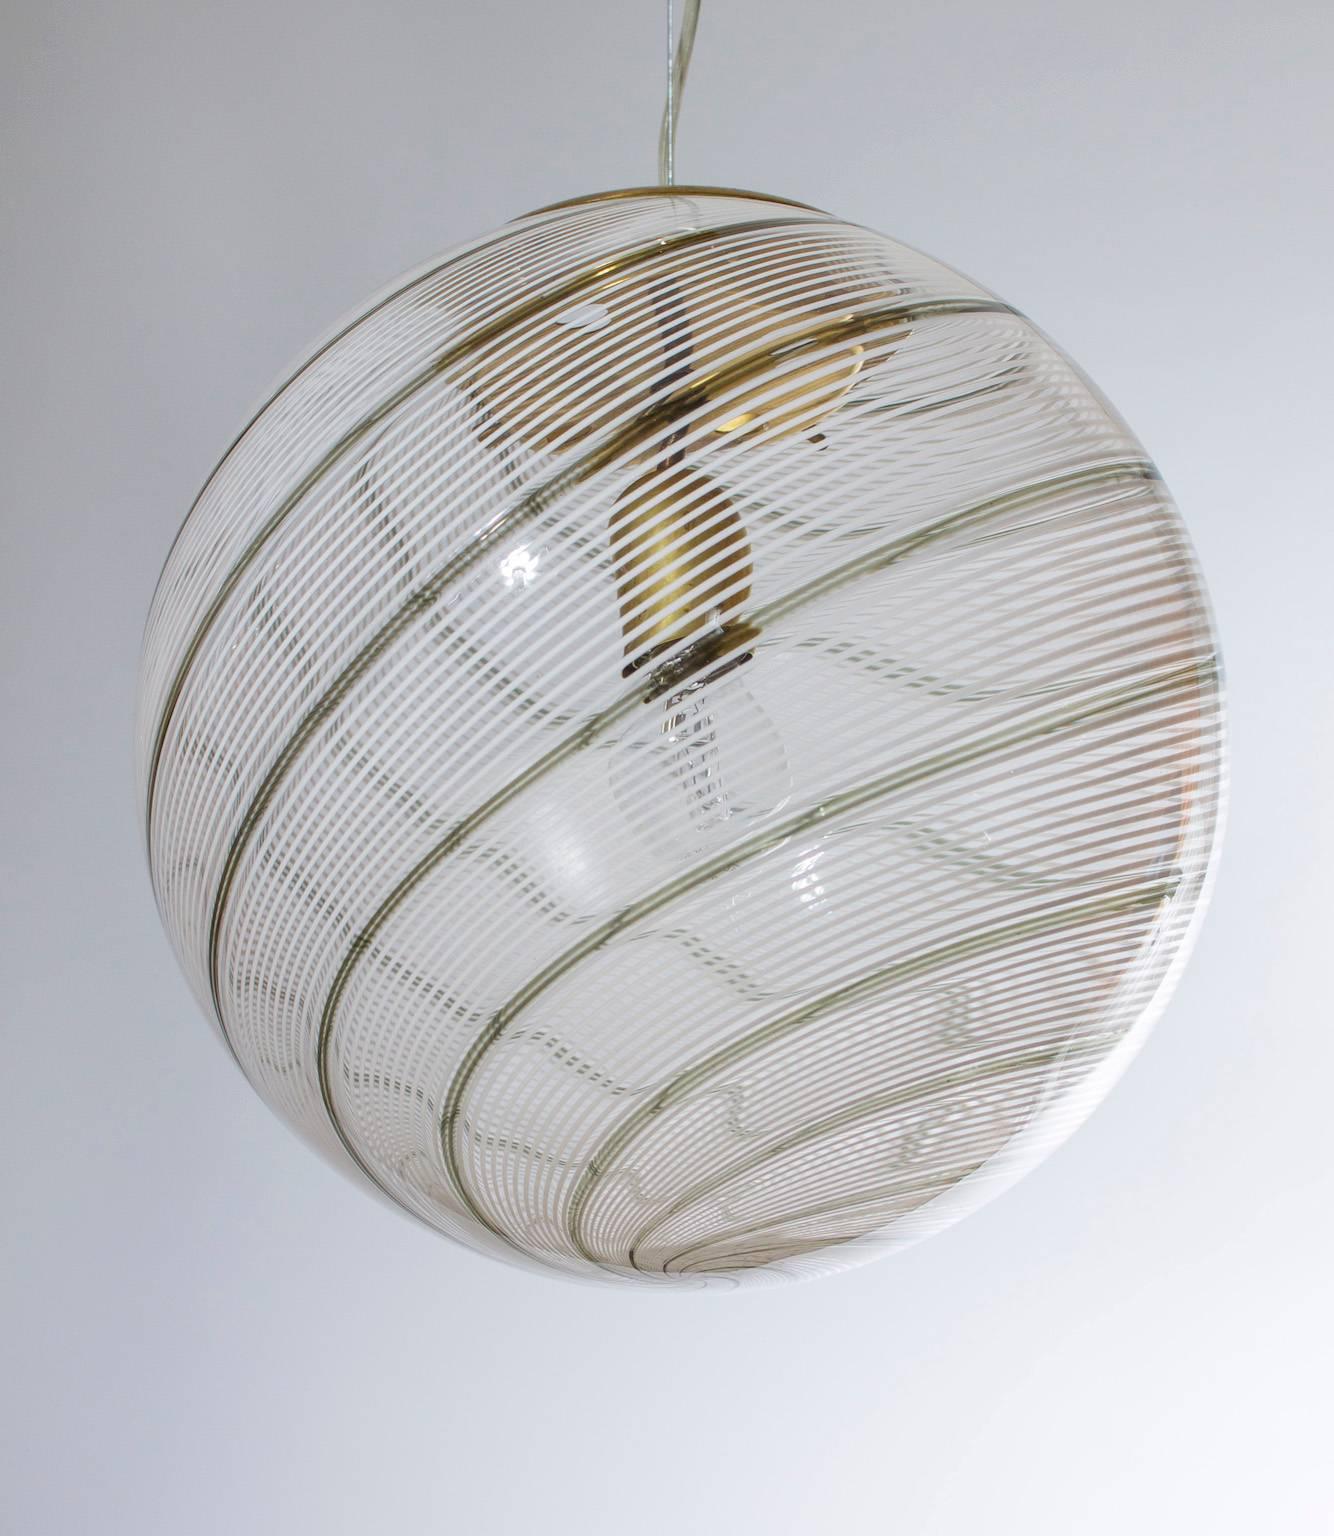 Art Deco Vintage Murano Fixture: Clear Glass Sphere with Accented Stripes 1960s Italy For Sale